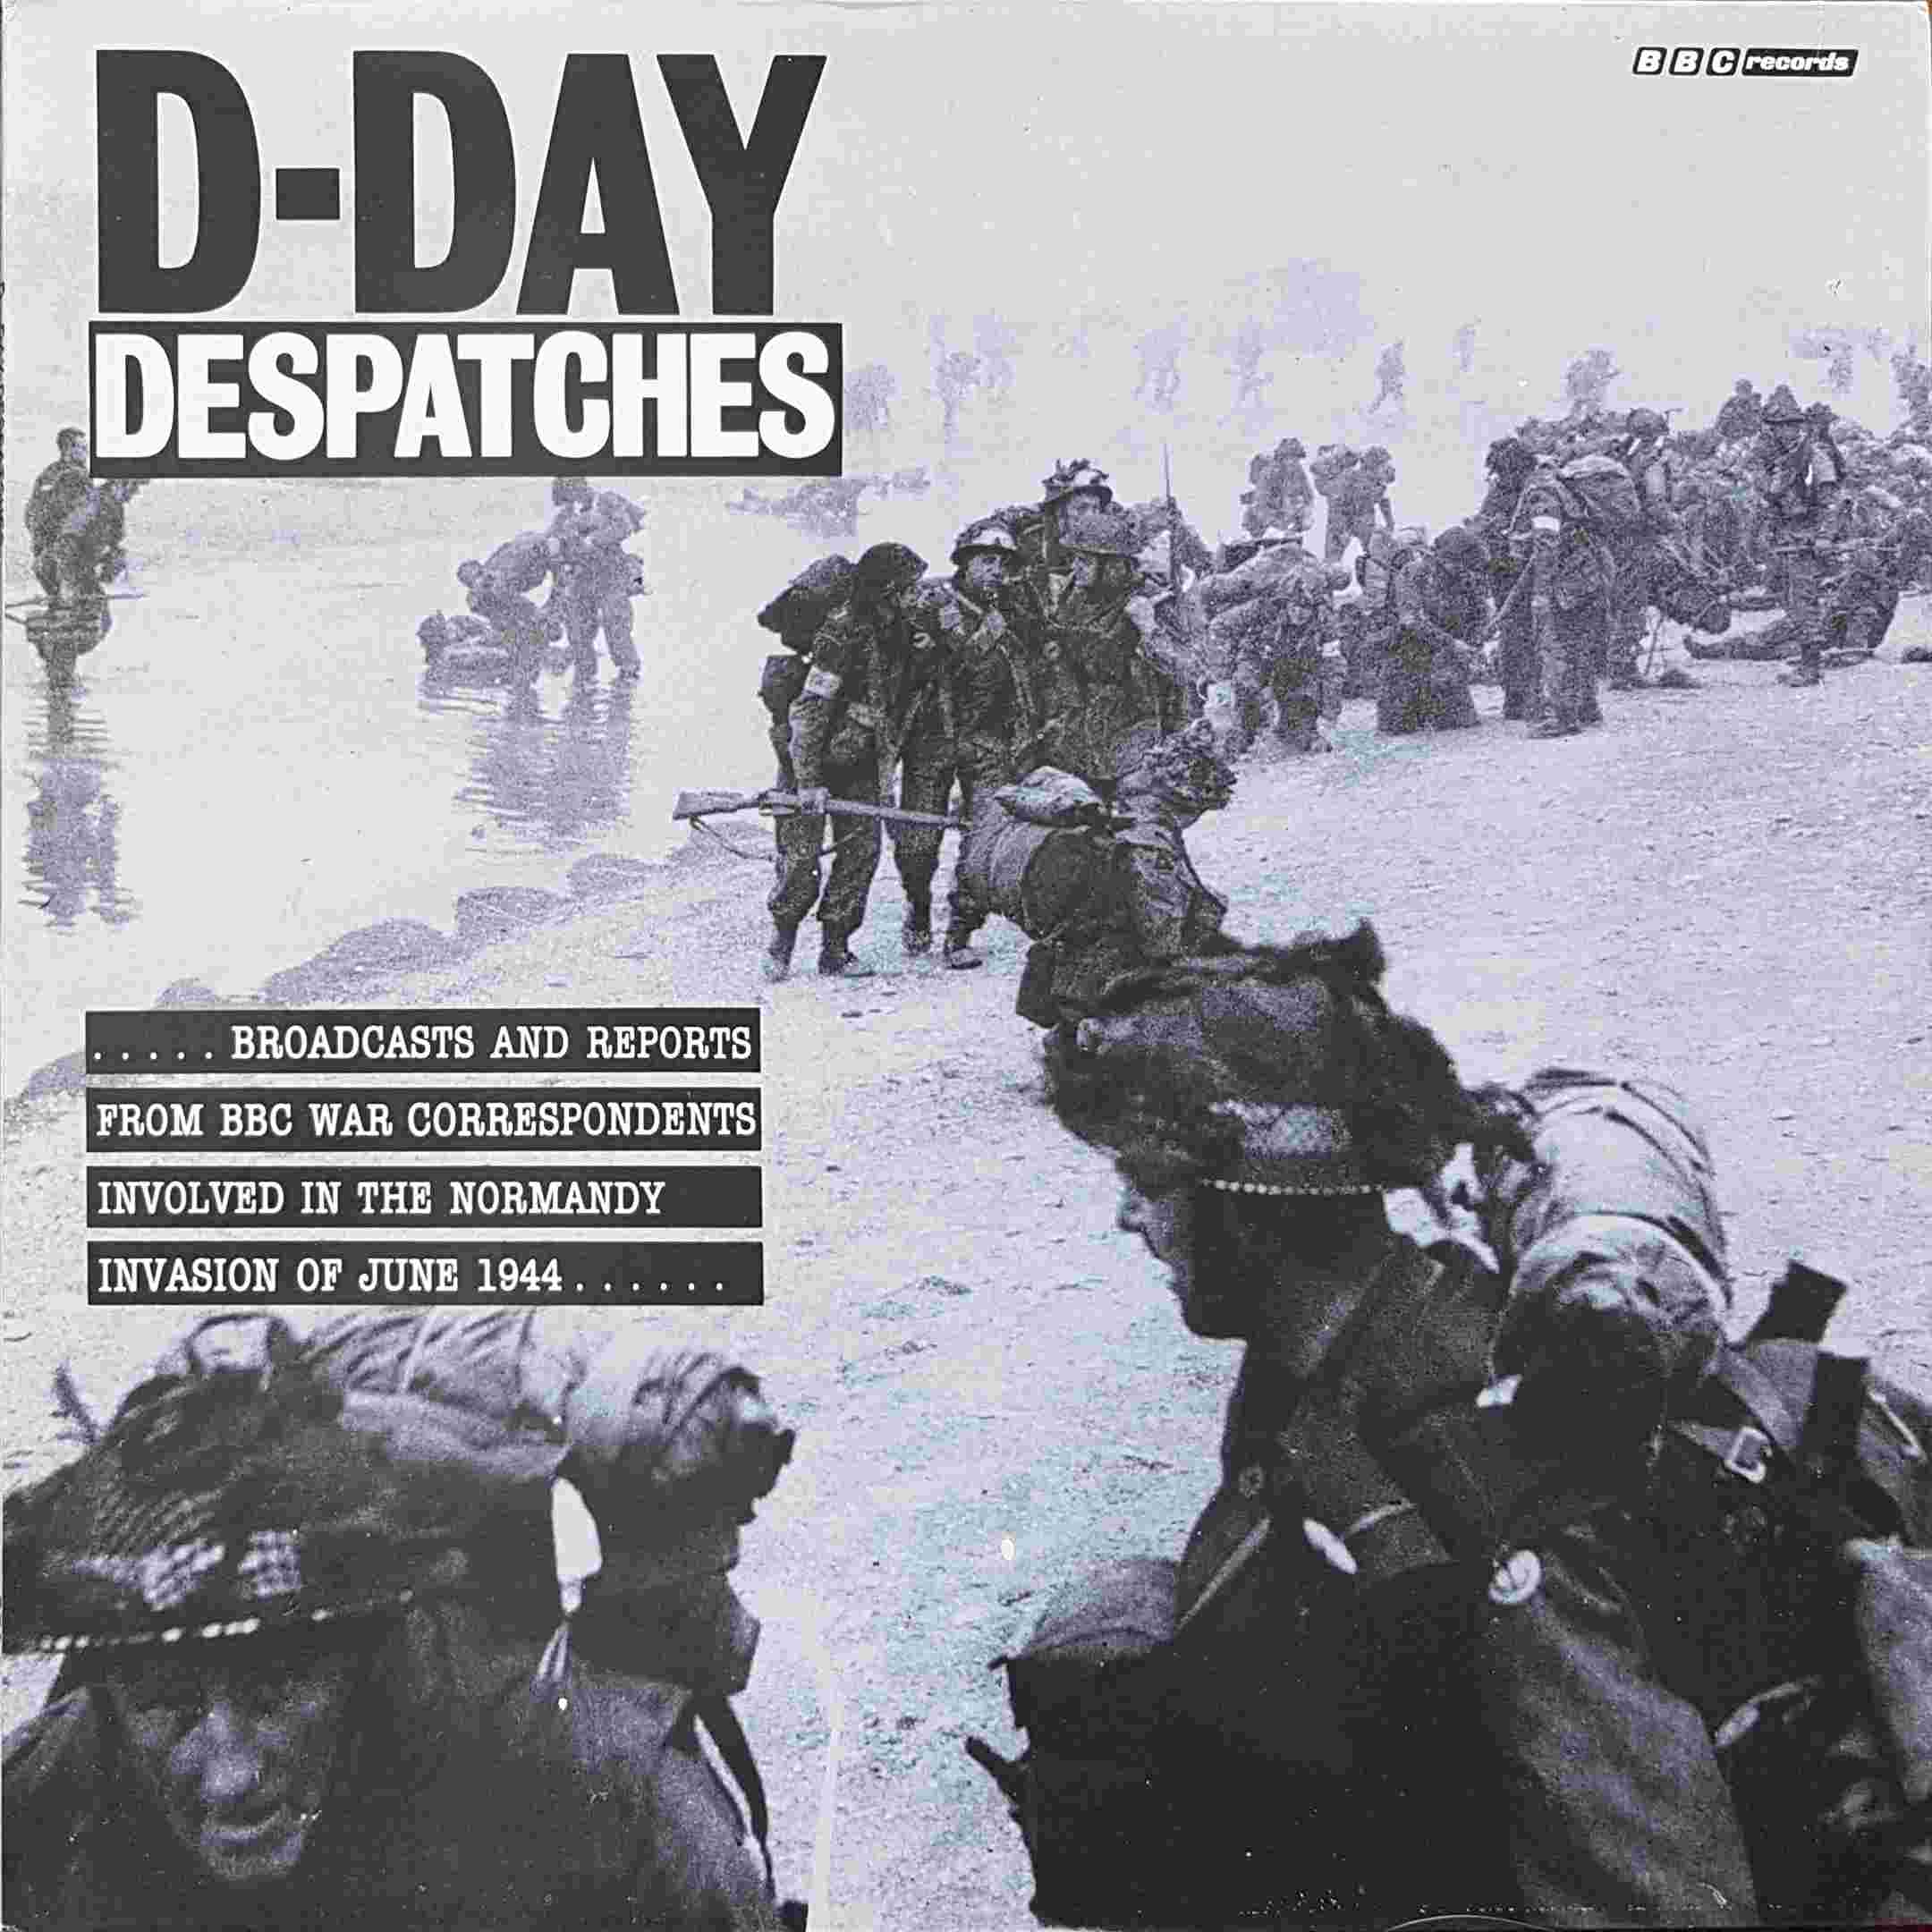 Picture of REC 522 D-day despatches by artist Various from the BBC albums - Records and Tapes library